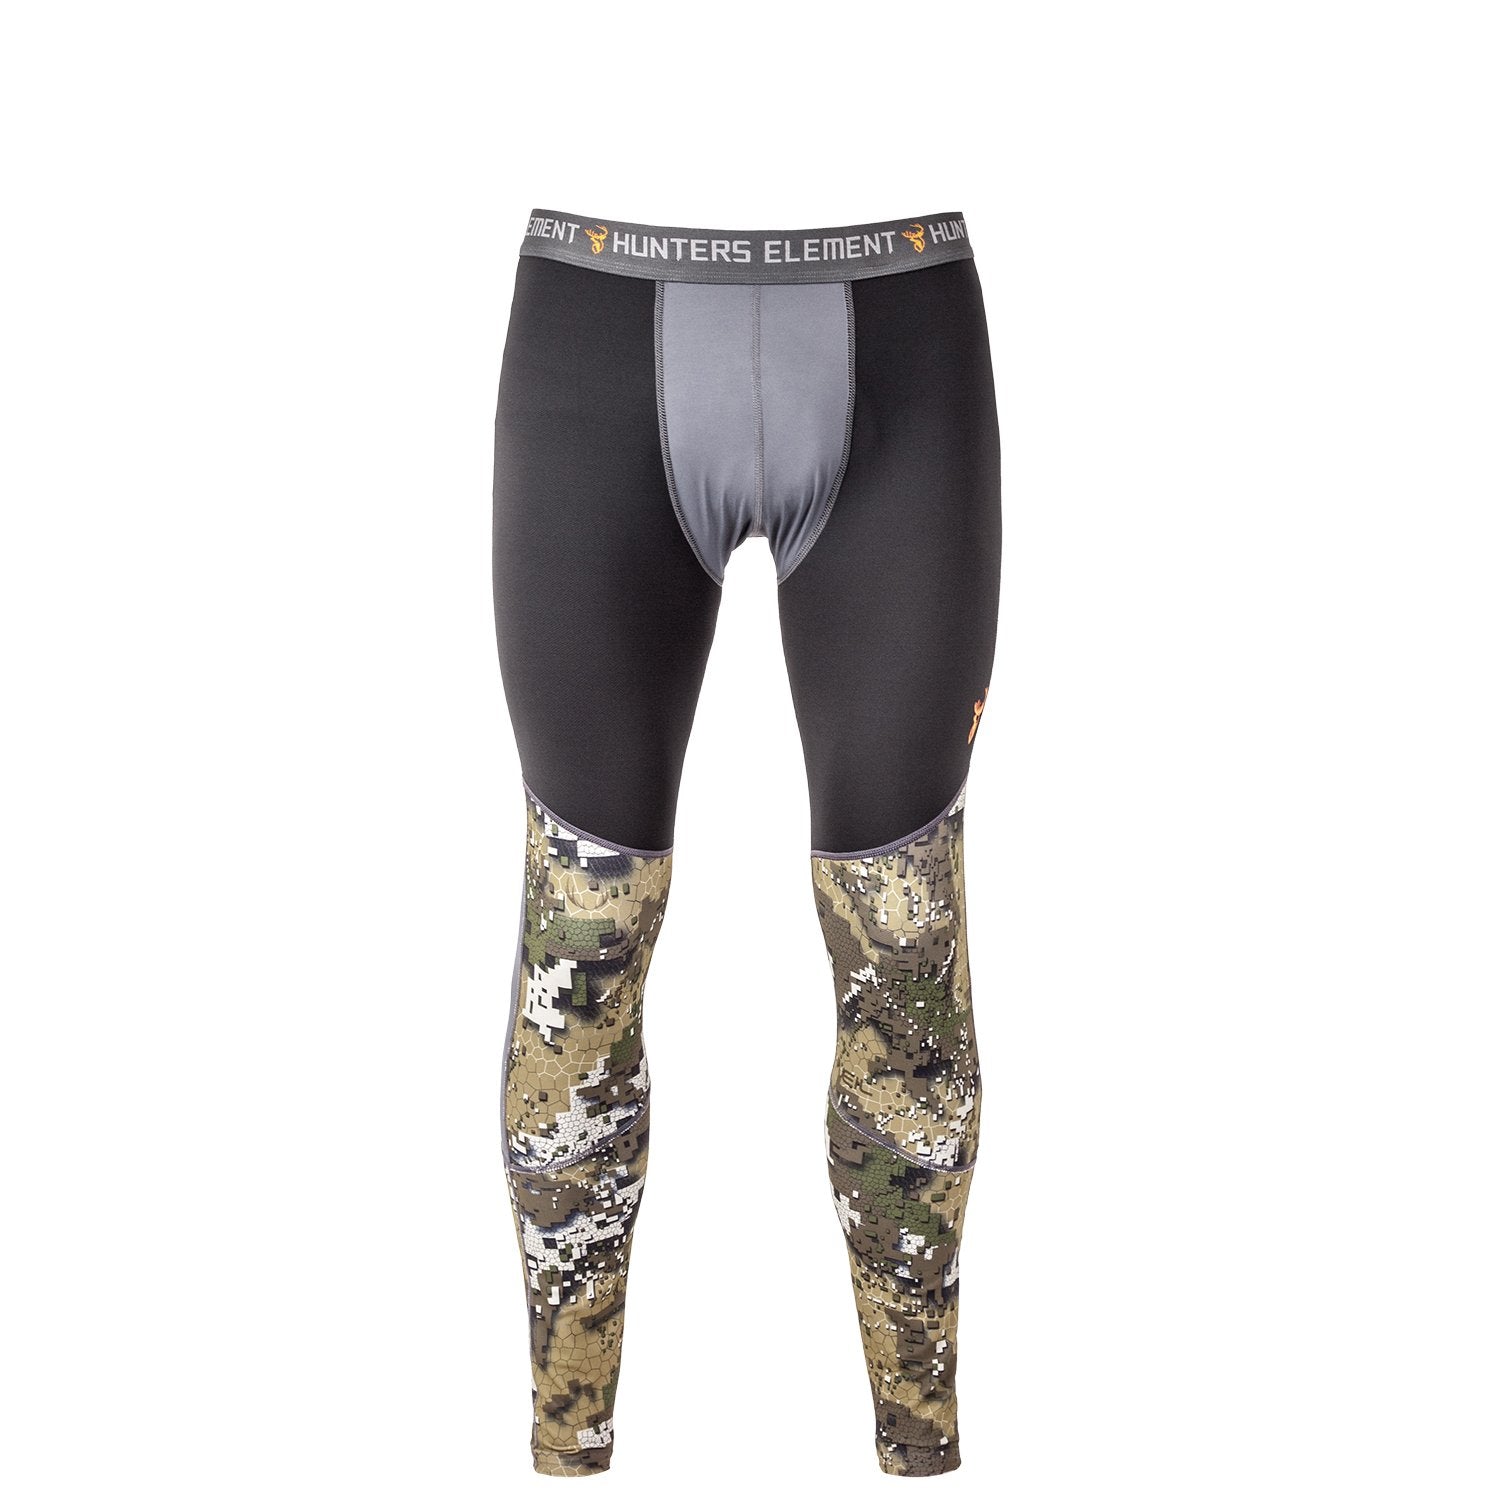 Hunters Element Core Leggings Desolve Veil - S - Mansfield Hunting & Fishing - Products to prepare for Corona Virus